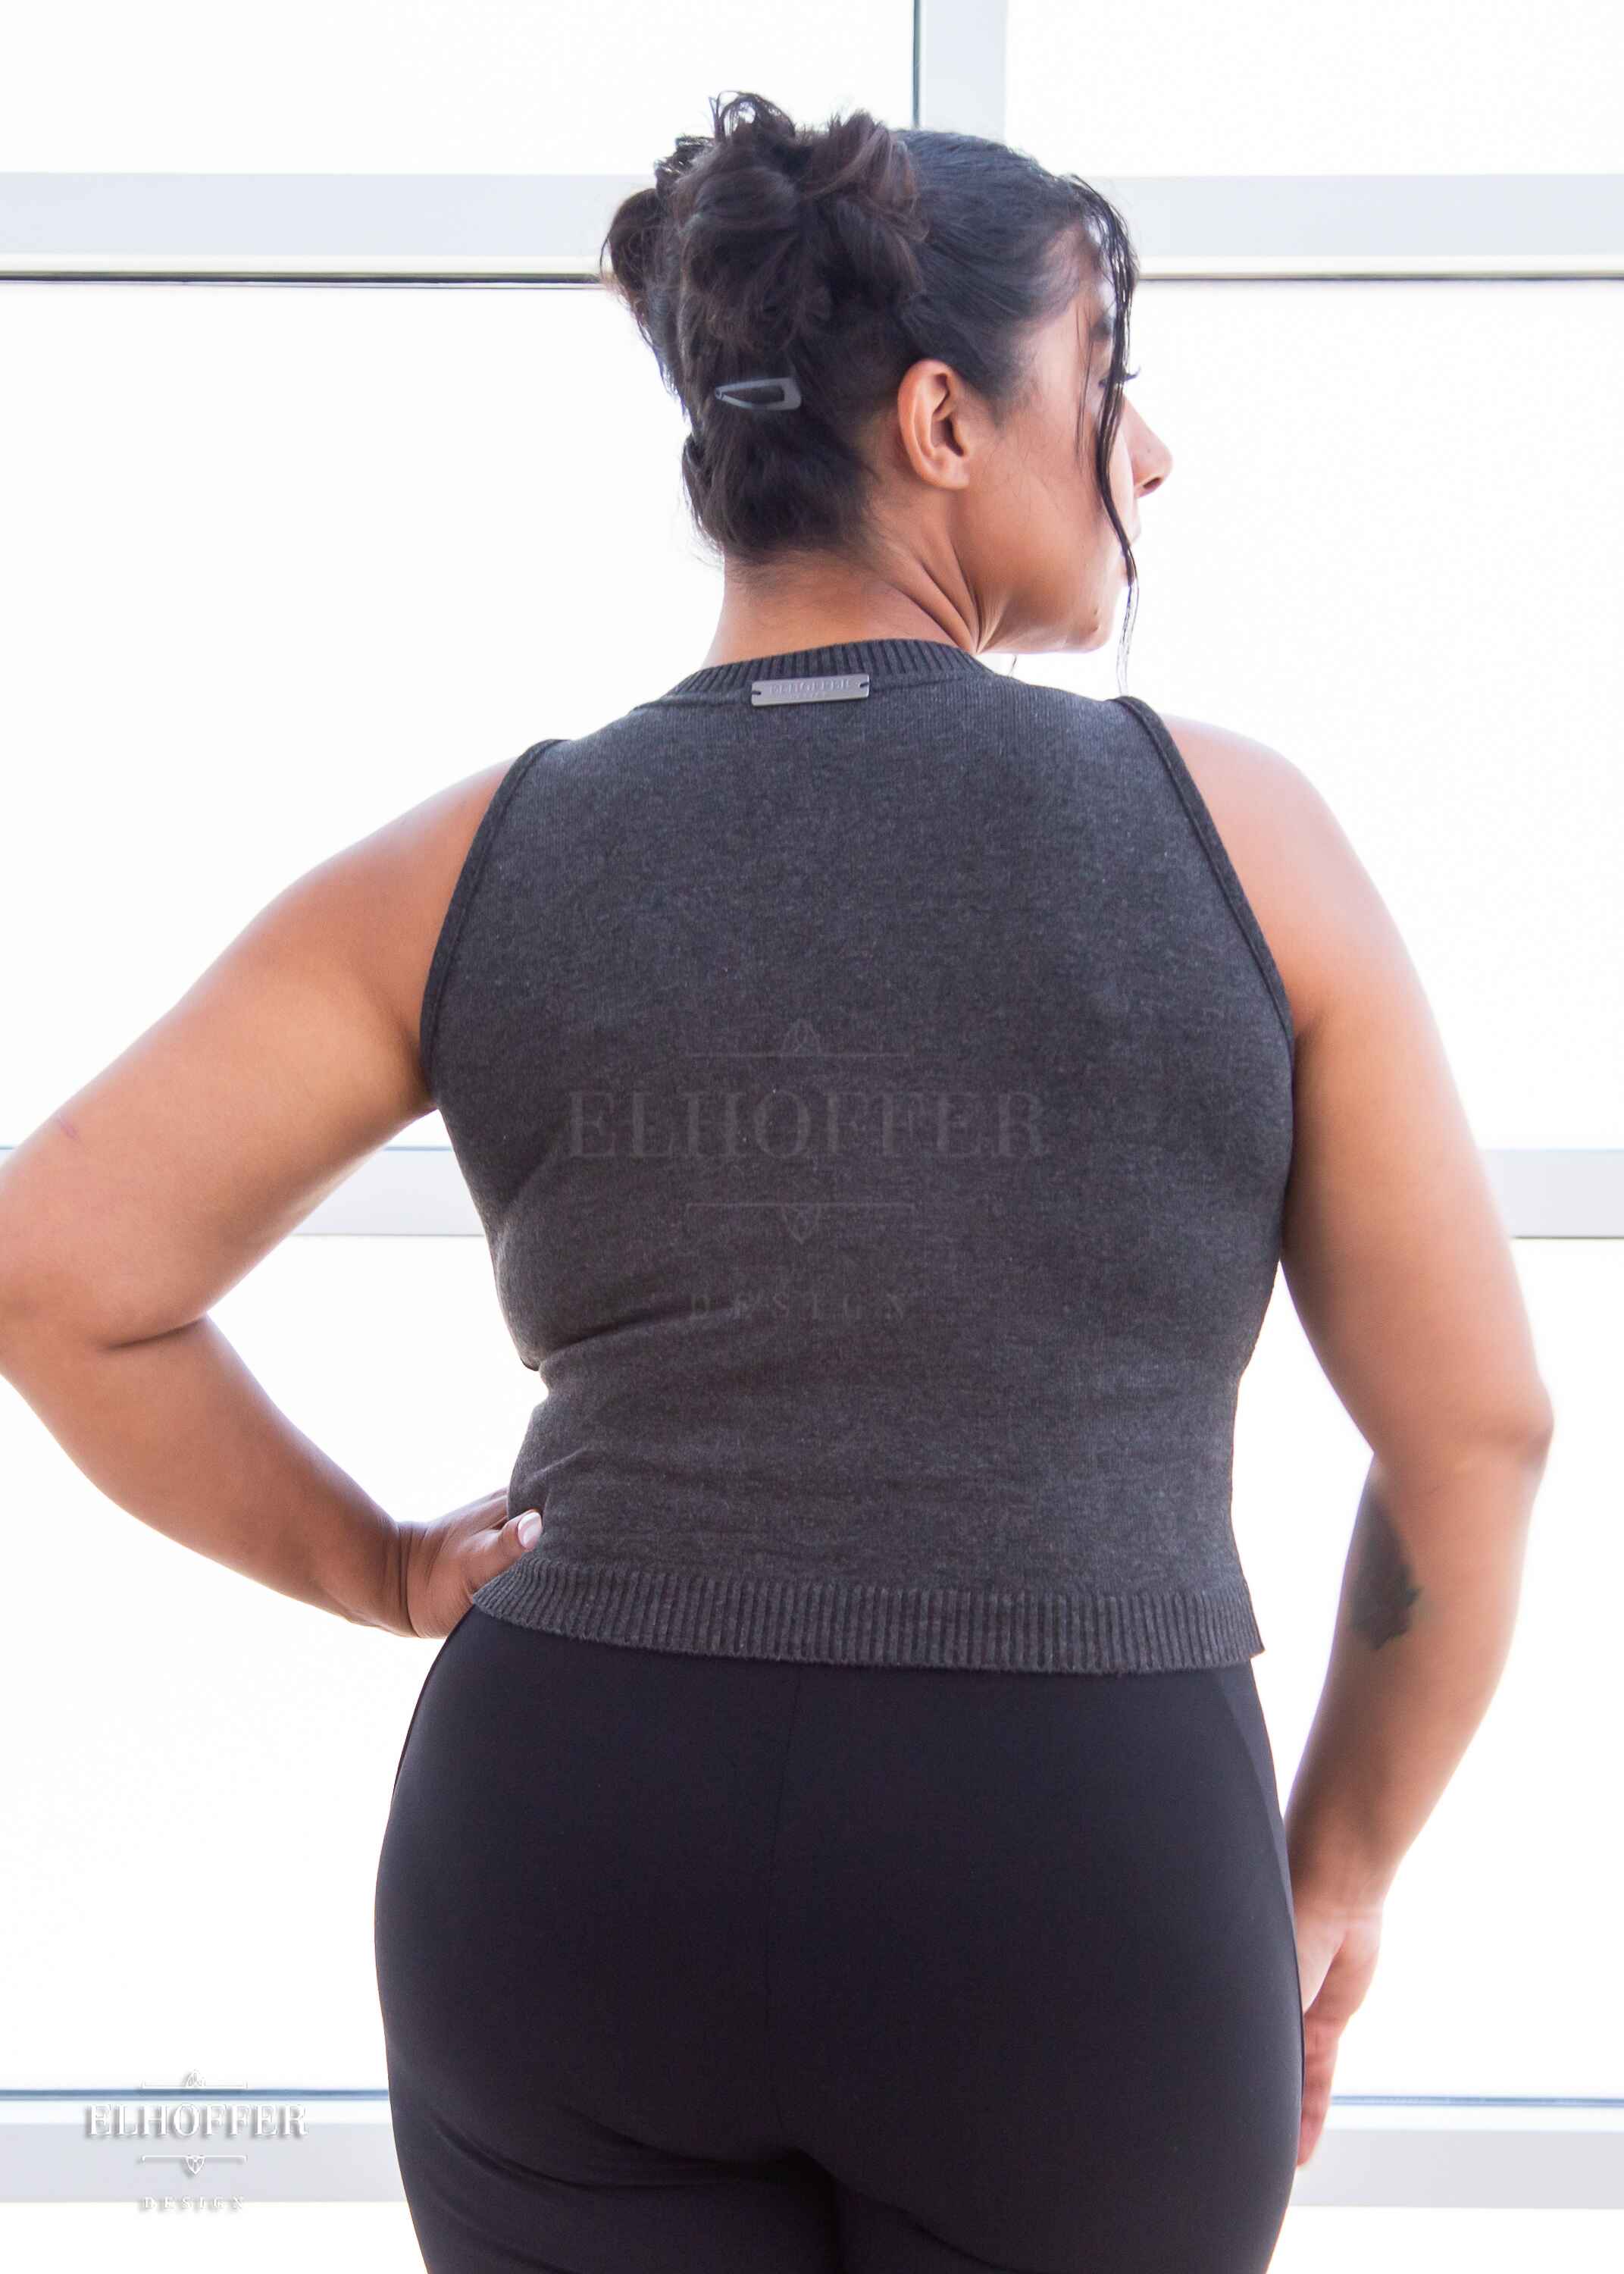 Janae is modeling the Production L. She has a 40” Bust, 35” Waist, 43” Hips, and is 5’7”.